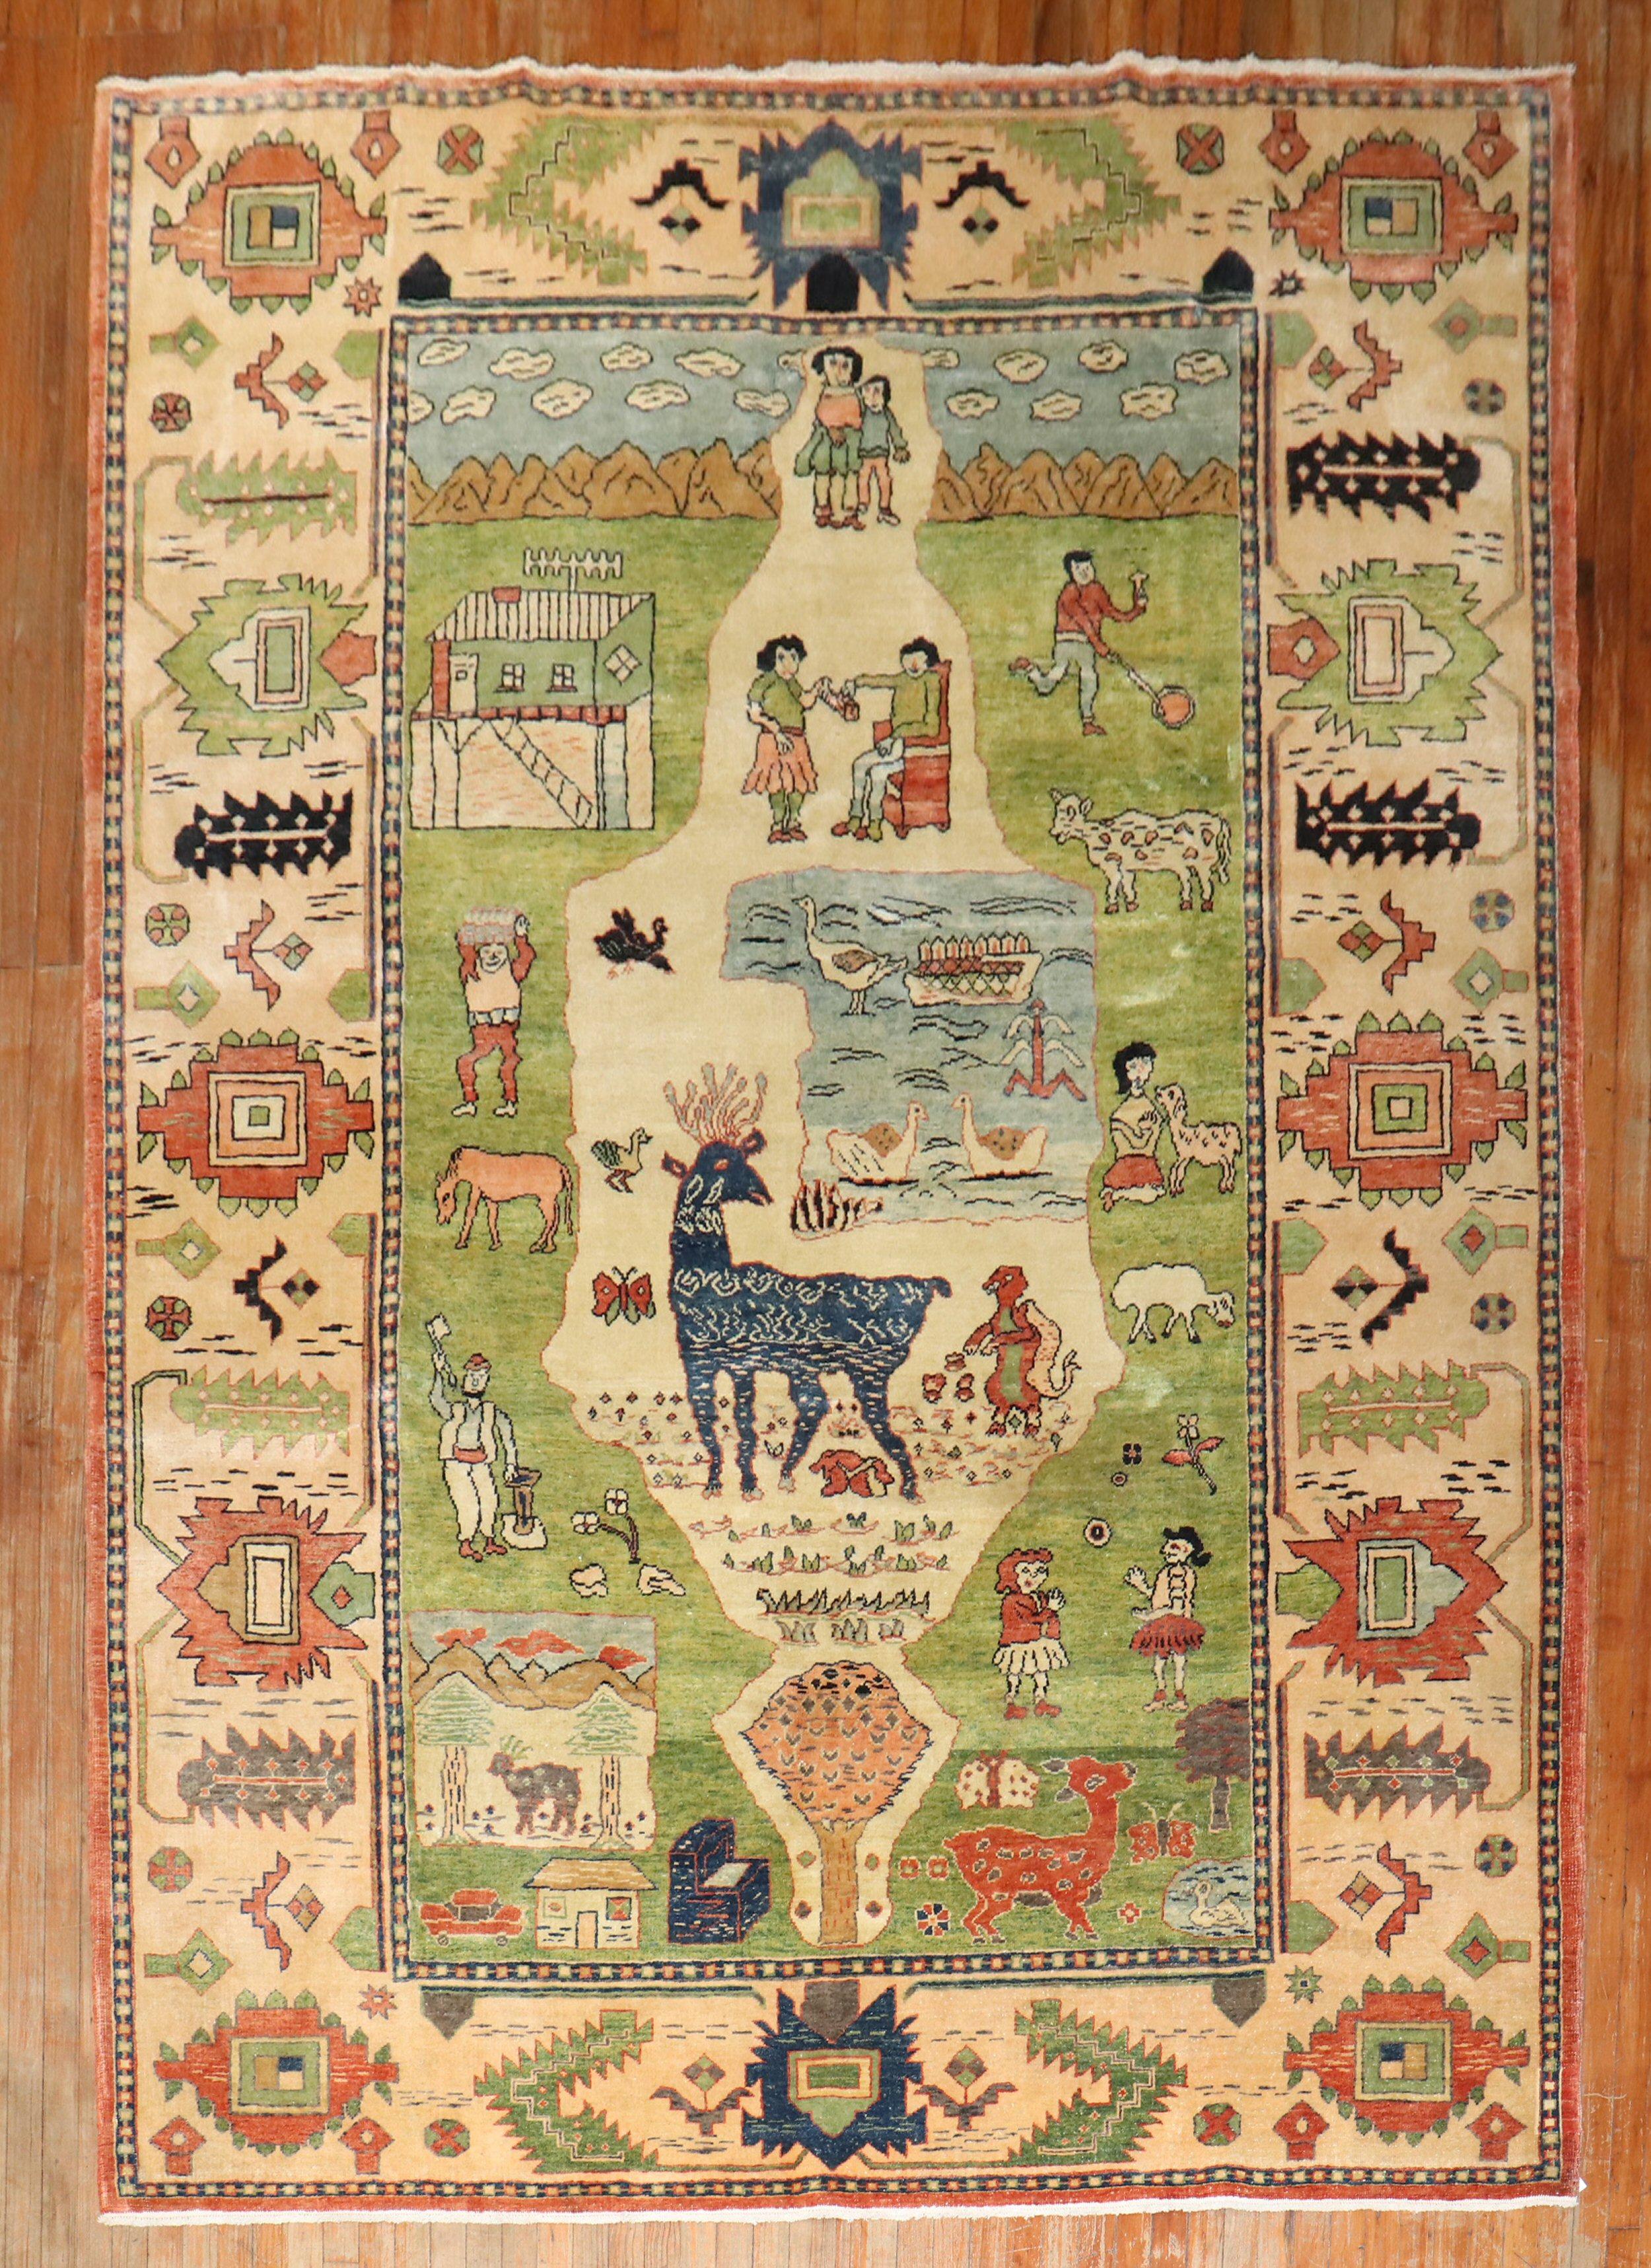 Room size pictorial scenery conversational Rug from the late 20th Century.

Measures: 7'8